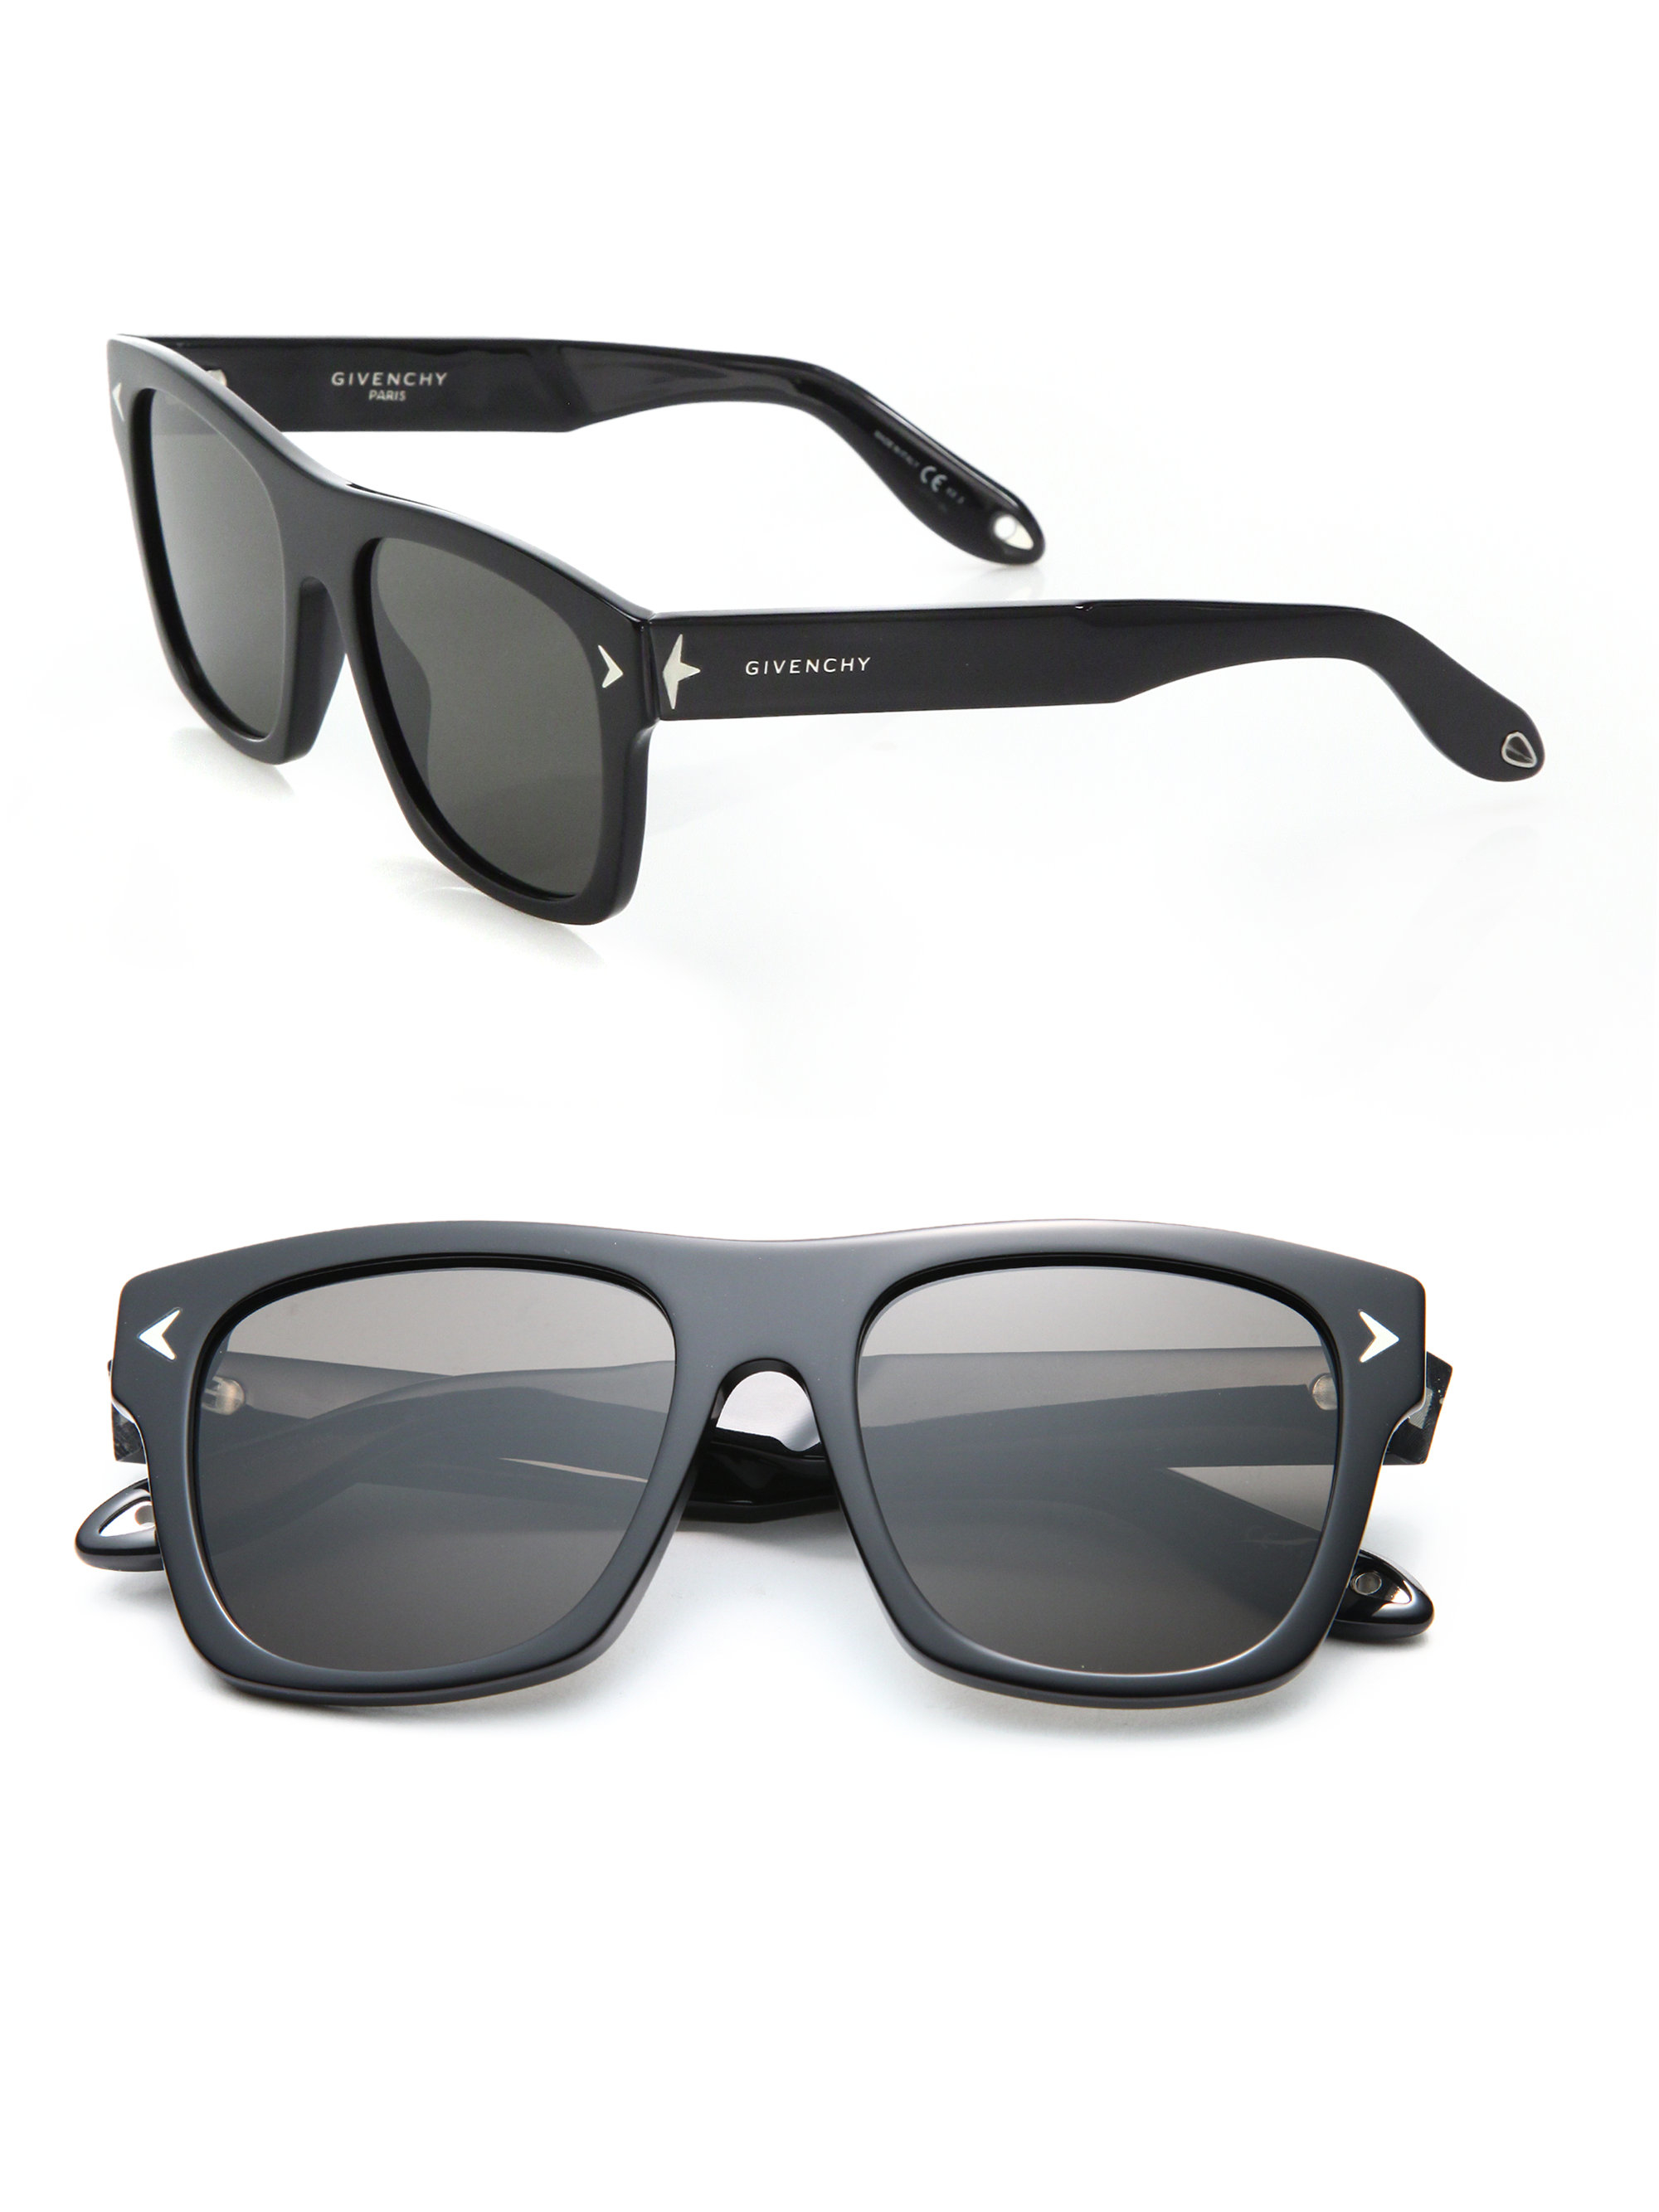 Givenchy 55mm Star-detail Square Sunglasses in Black | Lyst